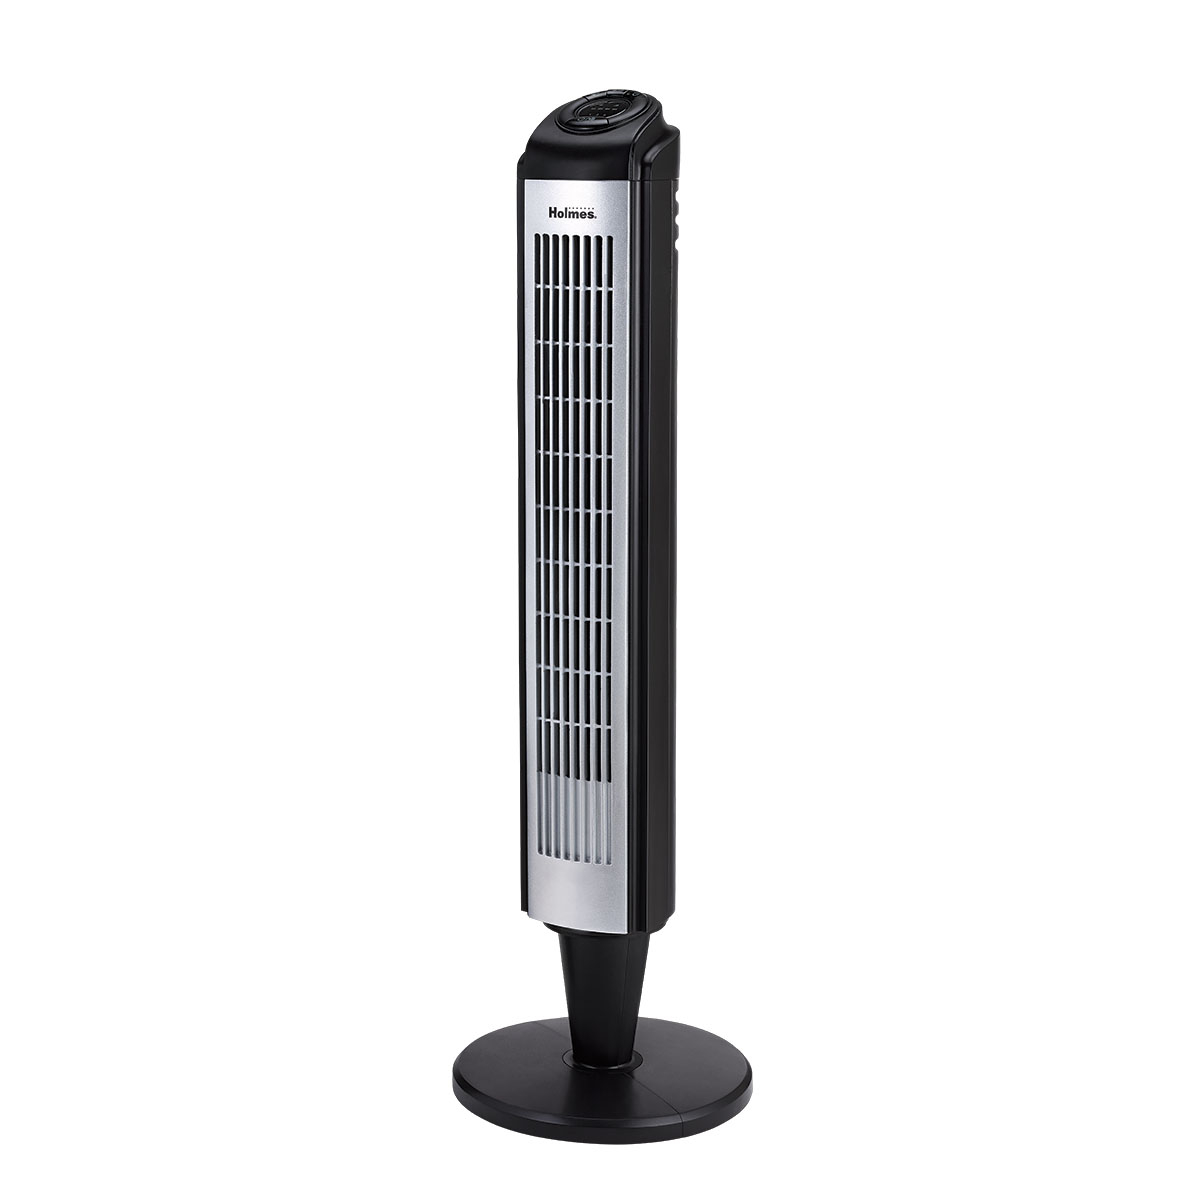 Holmes Htf3606ar 36 Tower Fan With Remote Control with regard to proportions 1200 X 1200